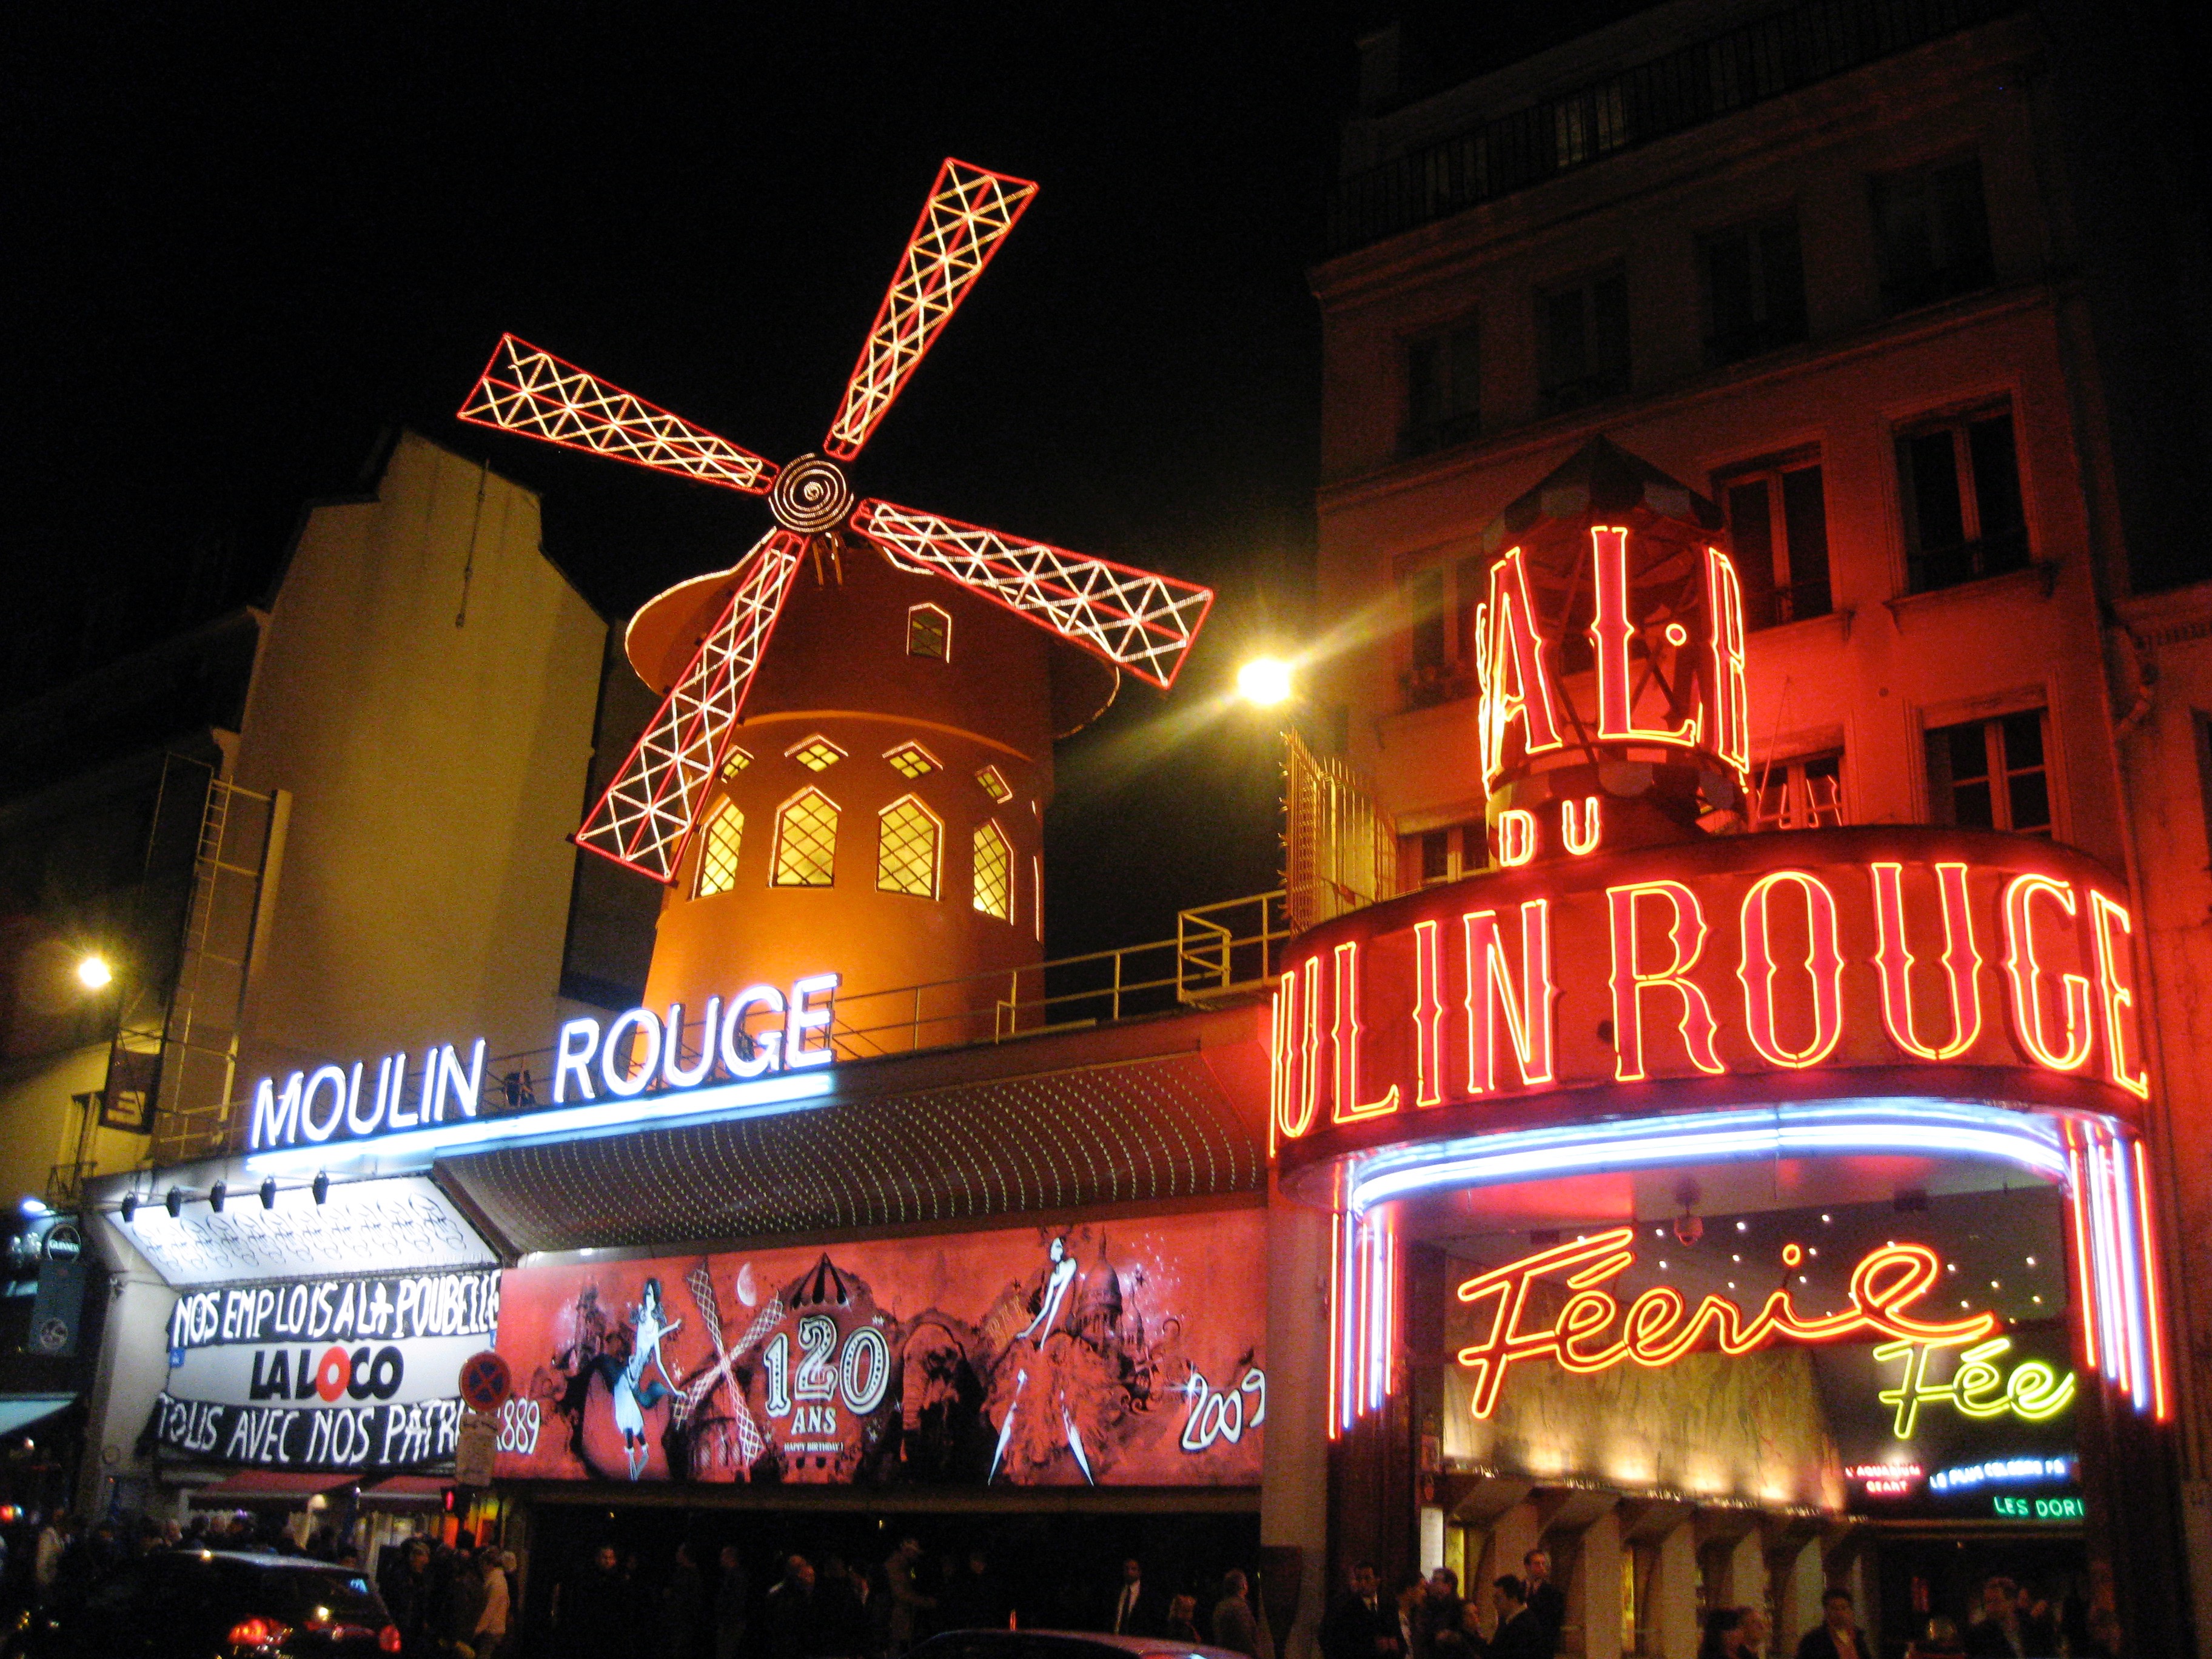 Paris Itinerary: Moulin Rouge